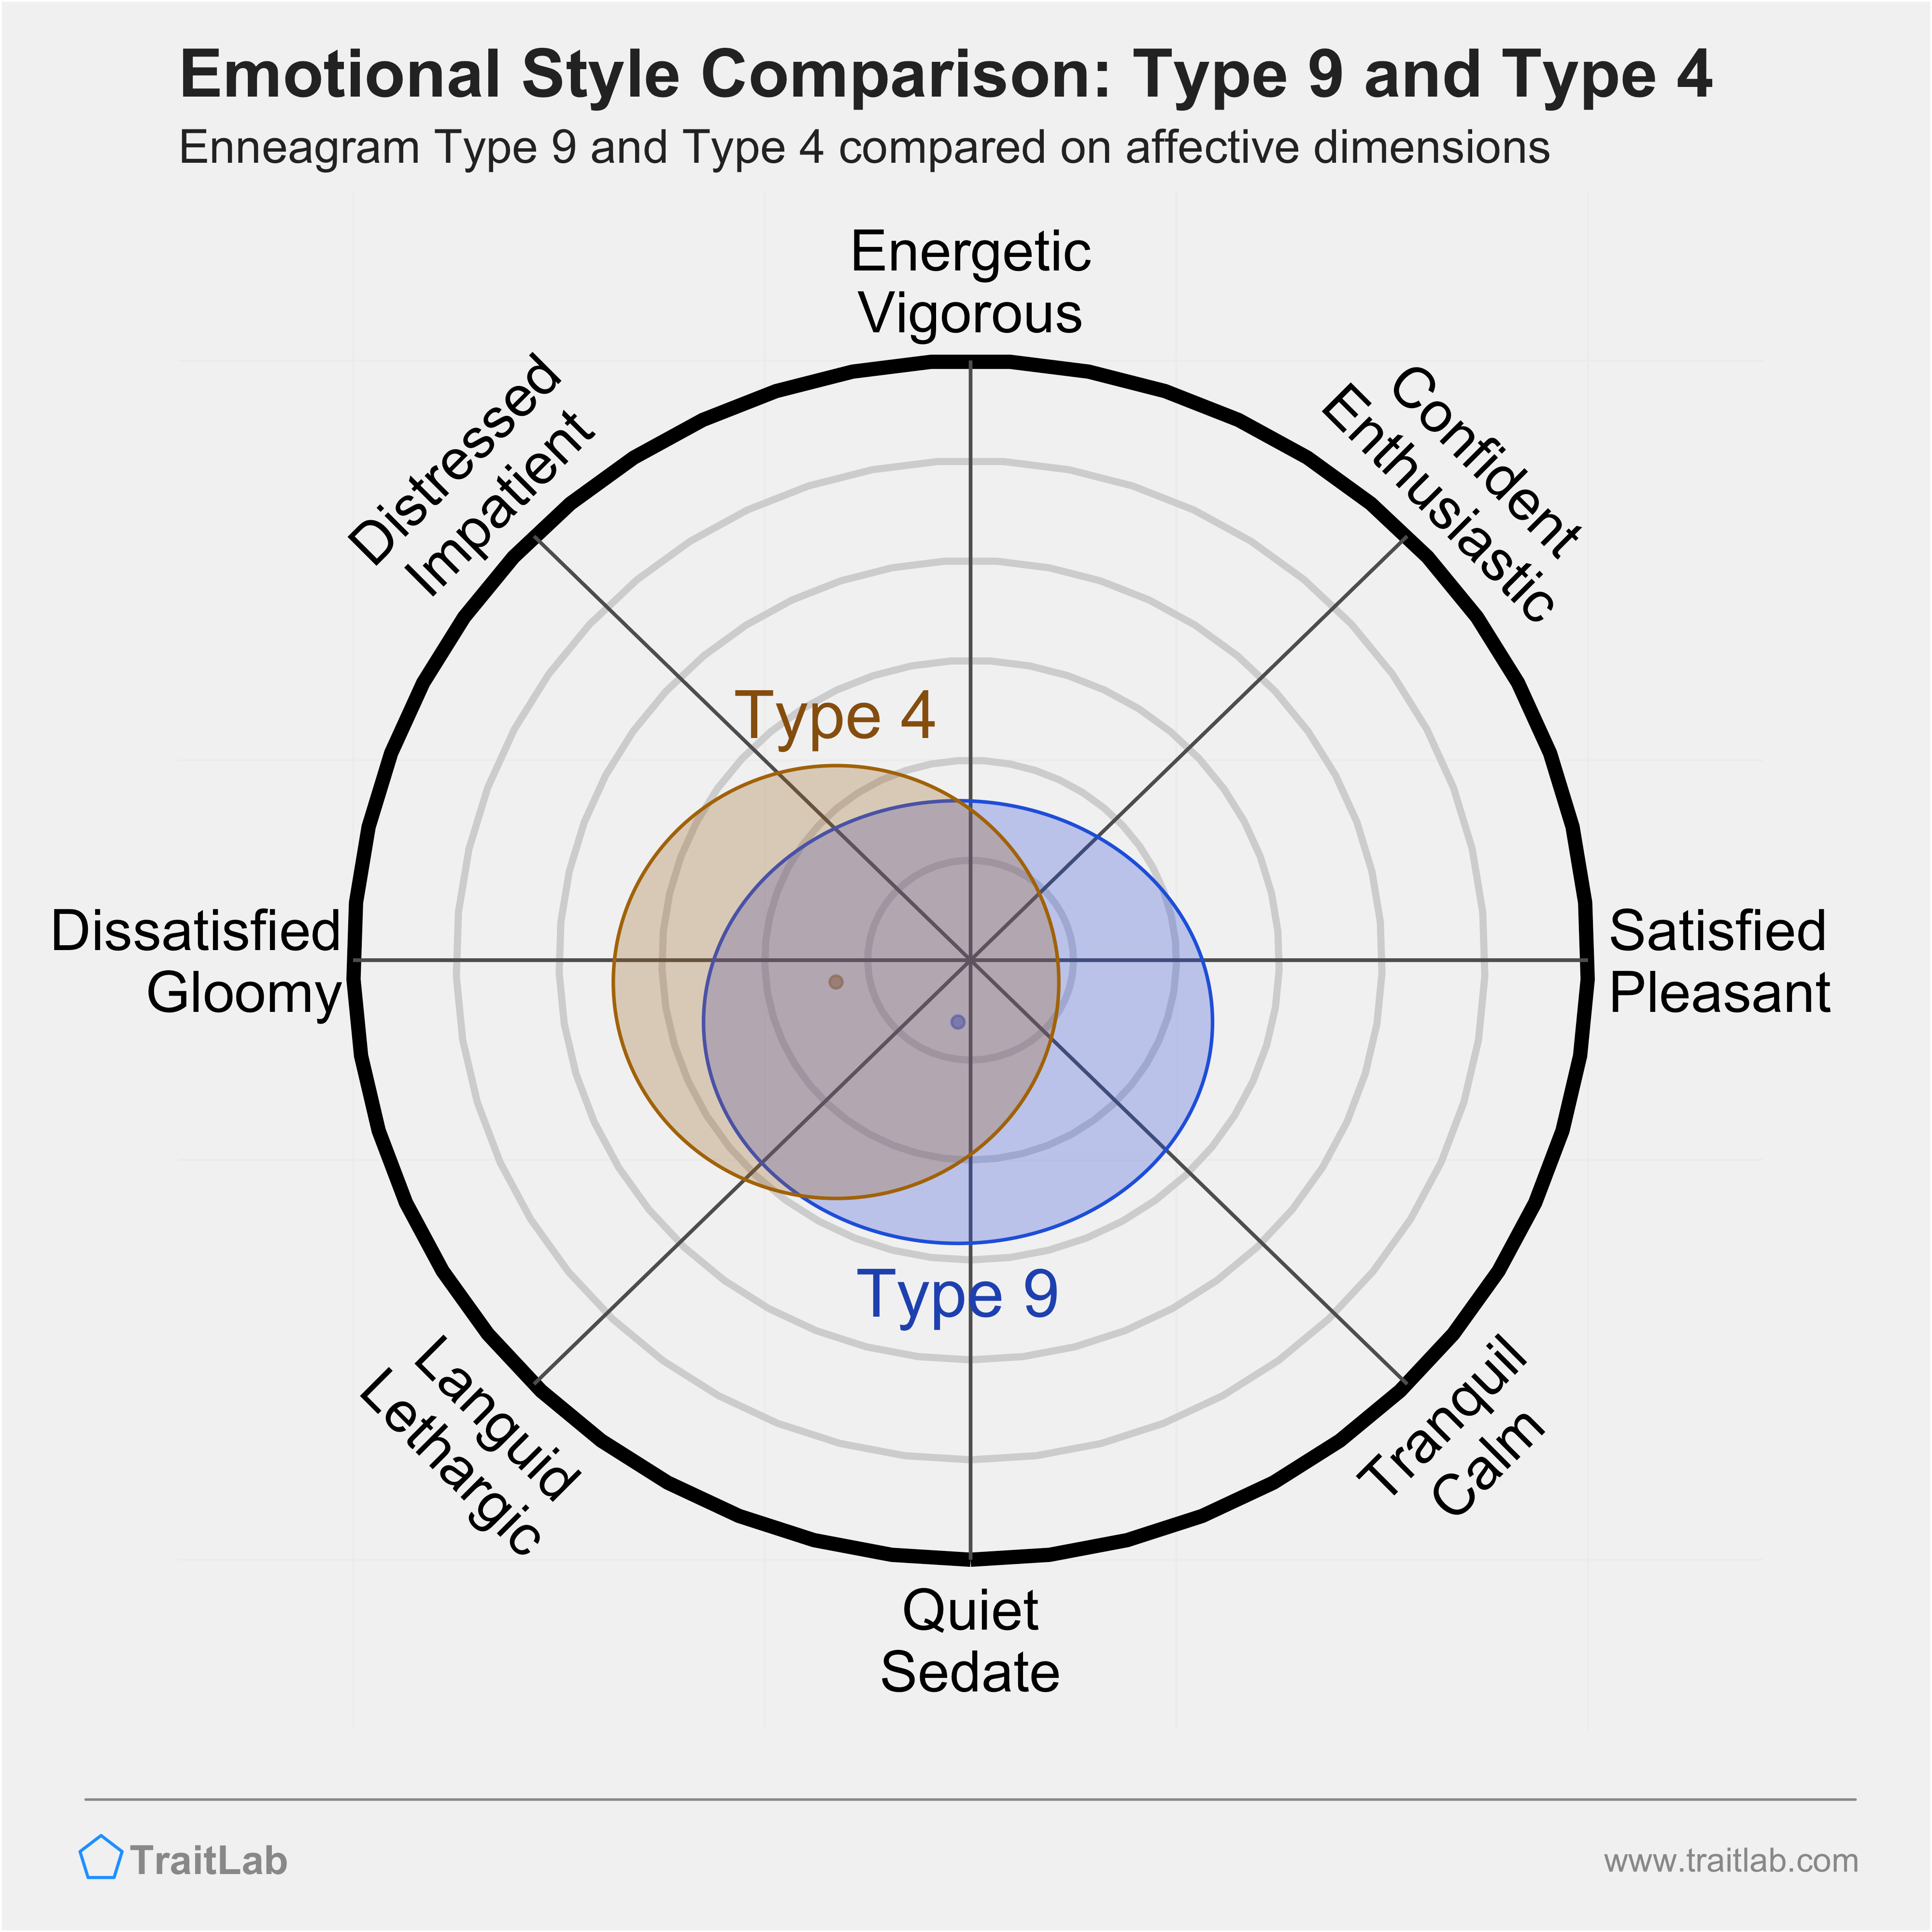 Type 9 and Type 4 comparison across emotional (affective) dimensions